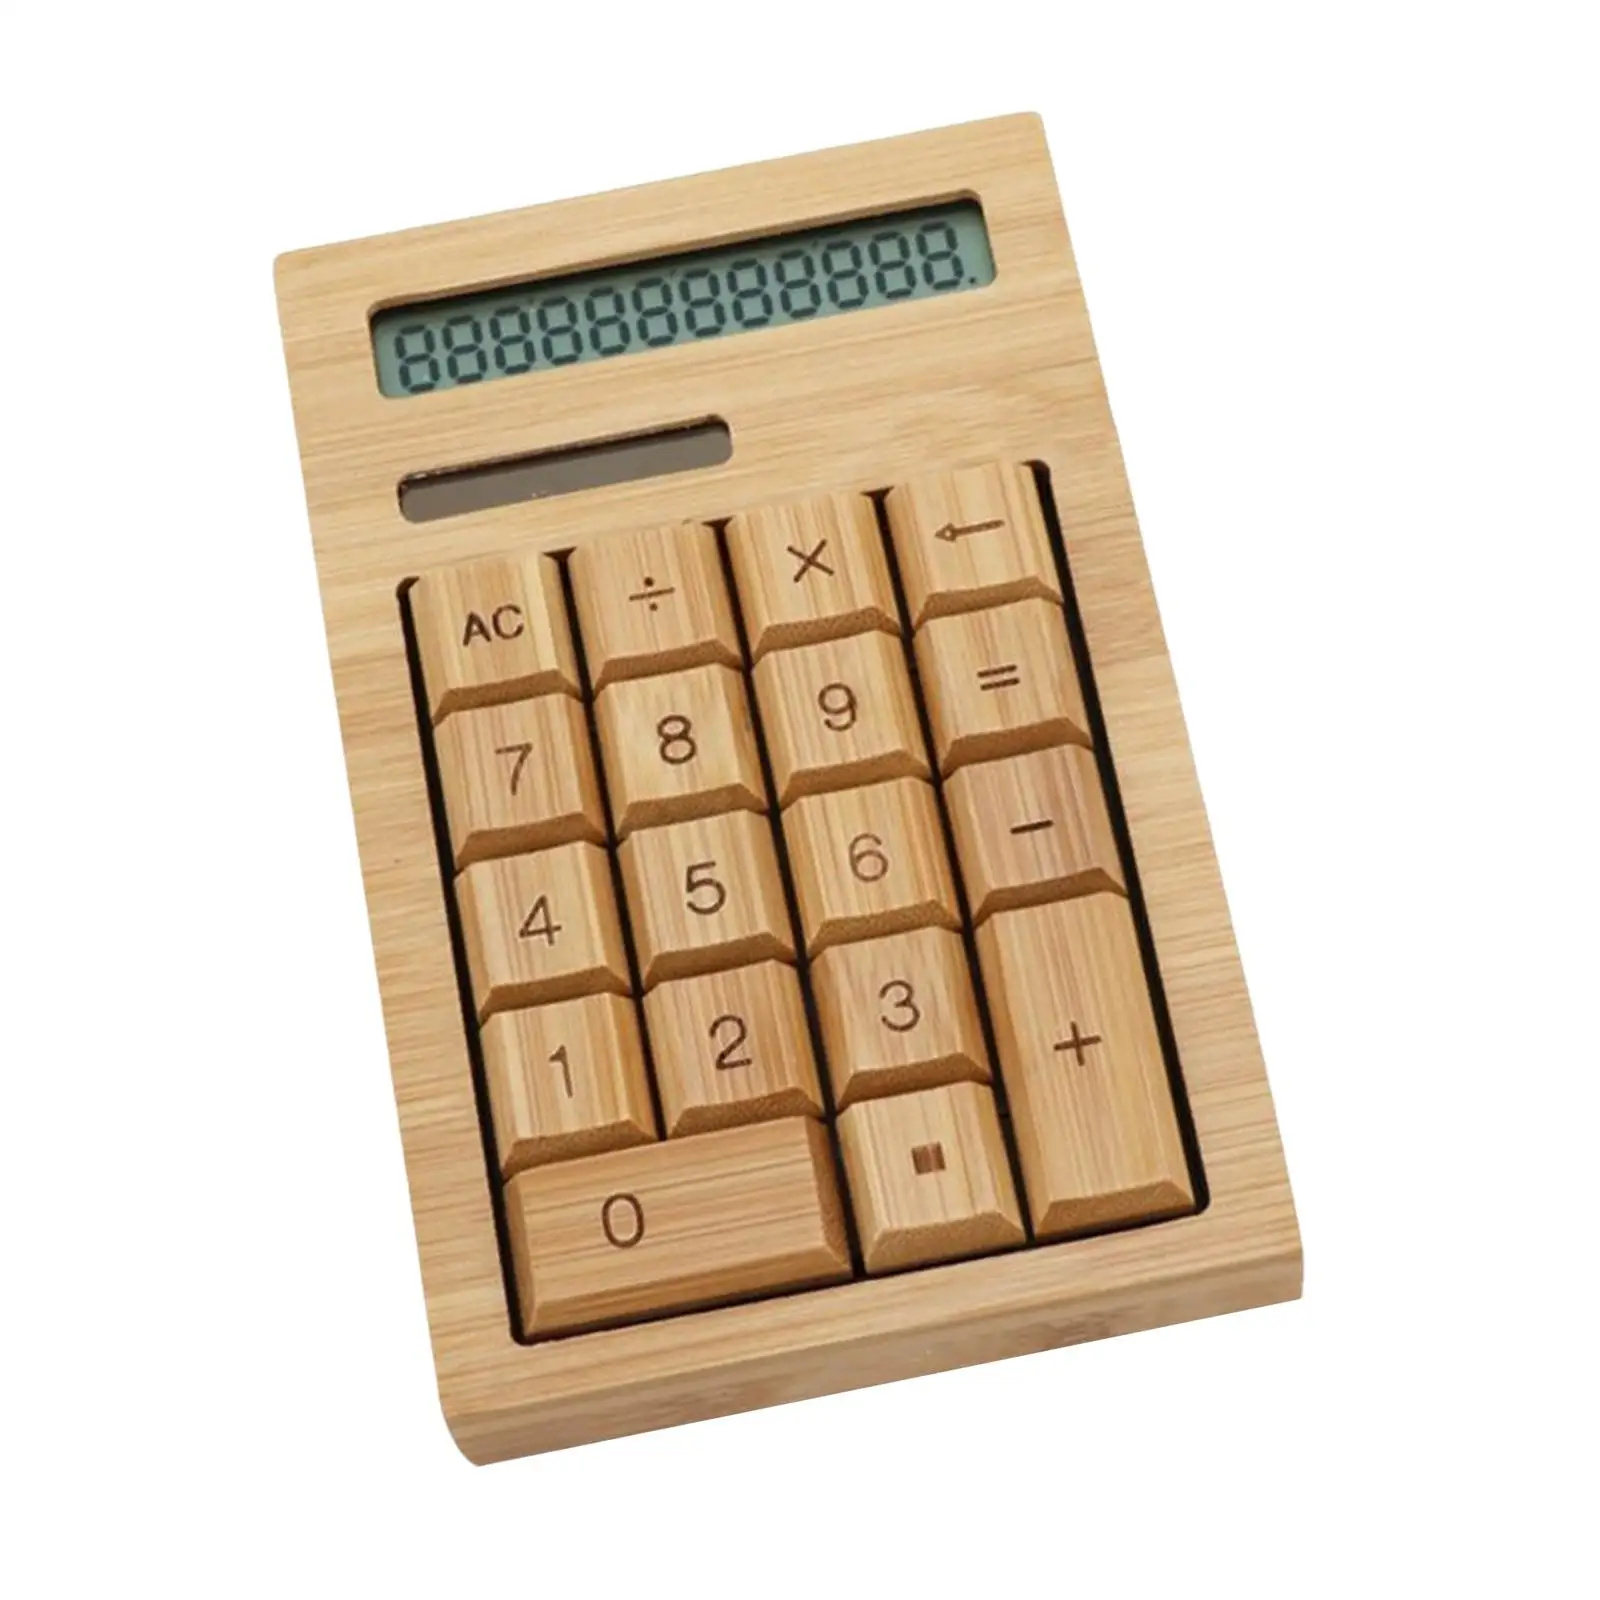 Bamboo Calculator Solar Power Waterproof Anti Static Functional Portable for Home